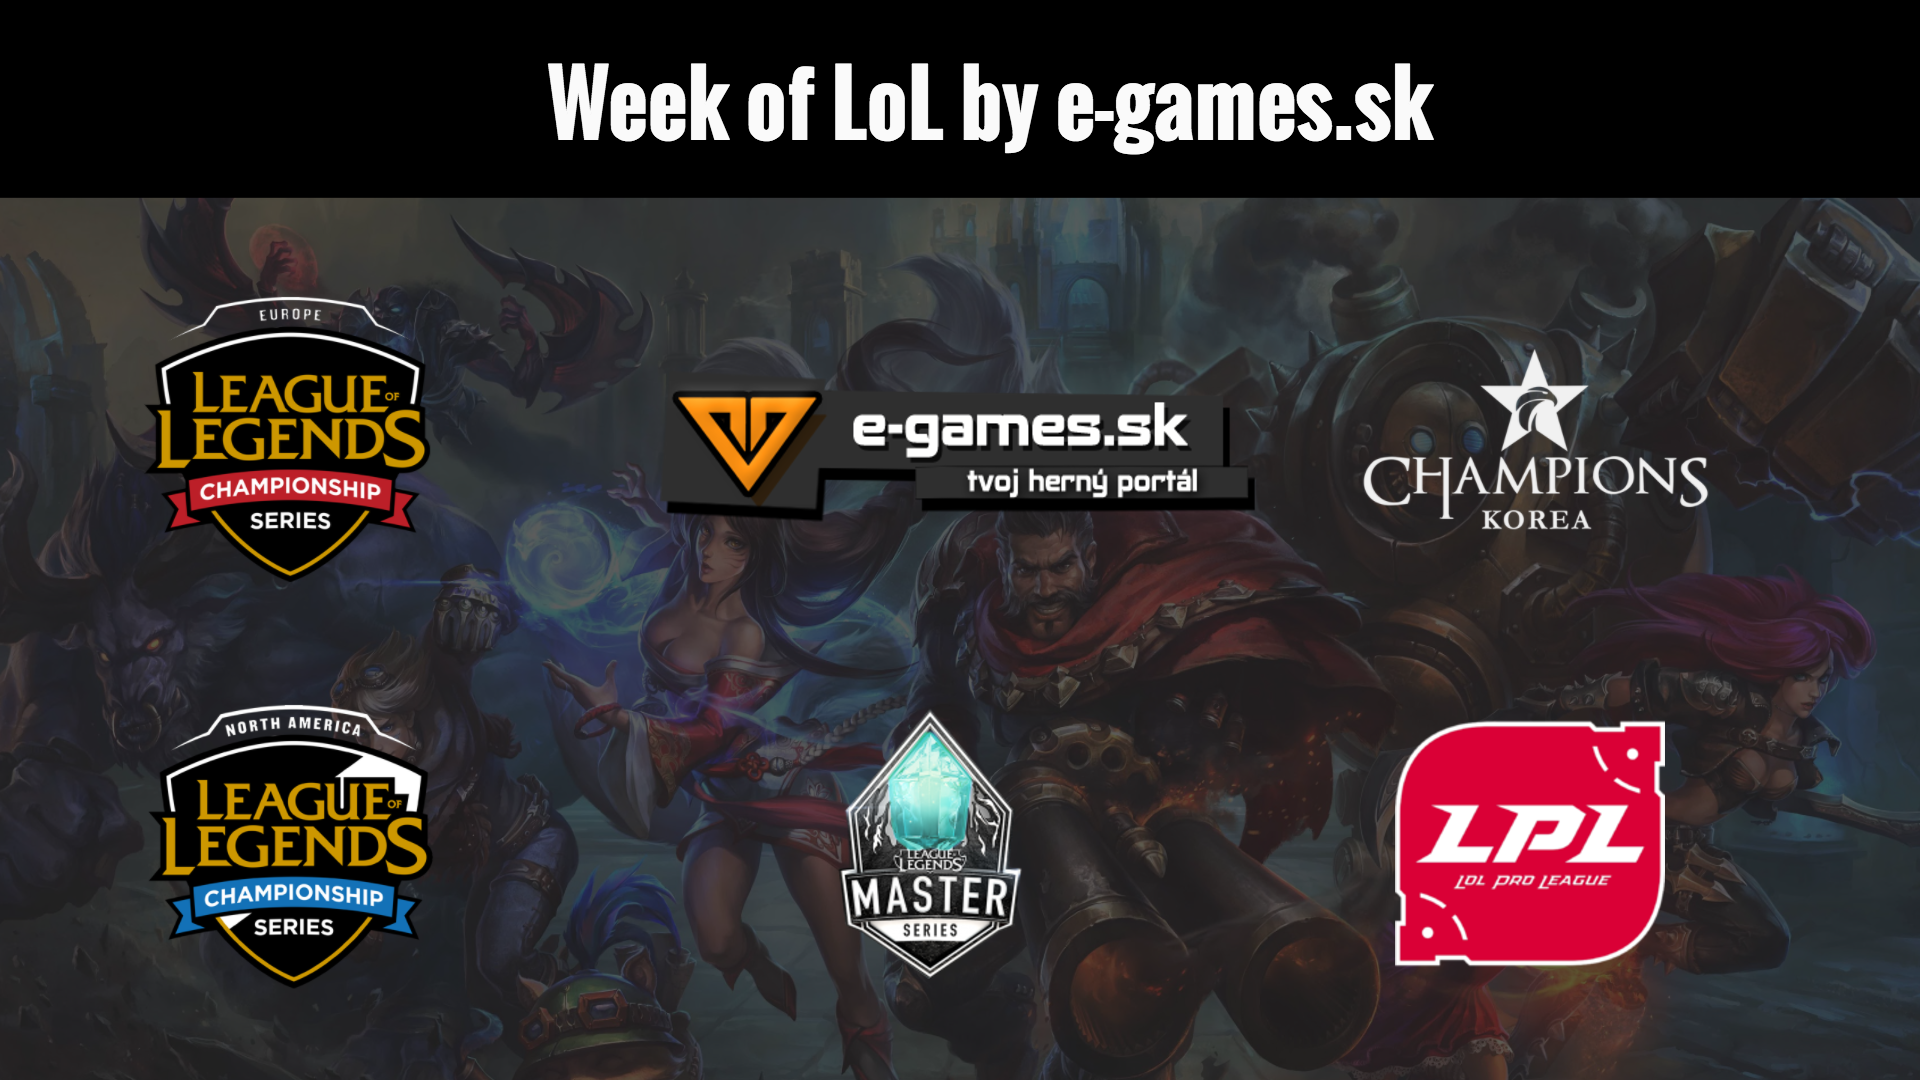 Week of LoL by e-games